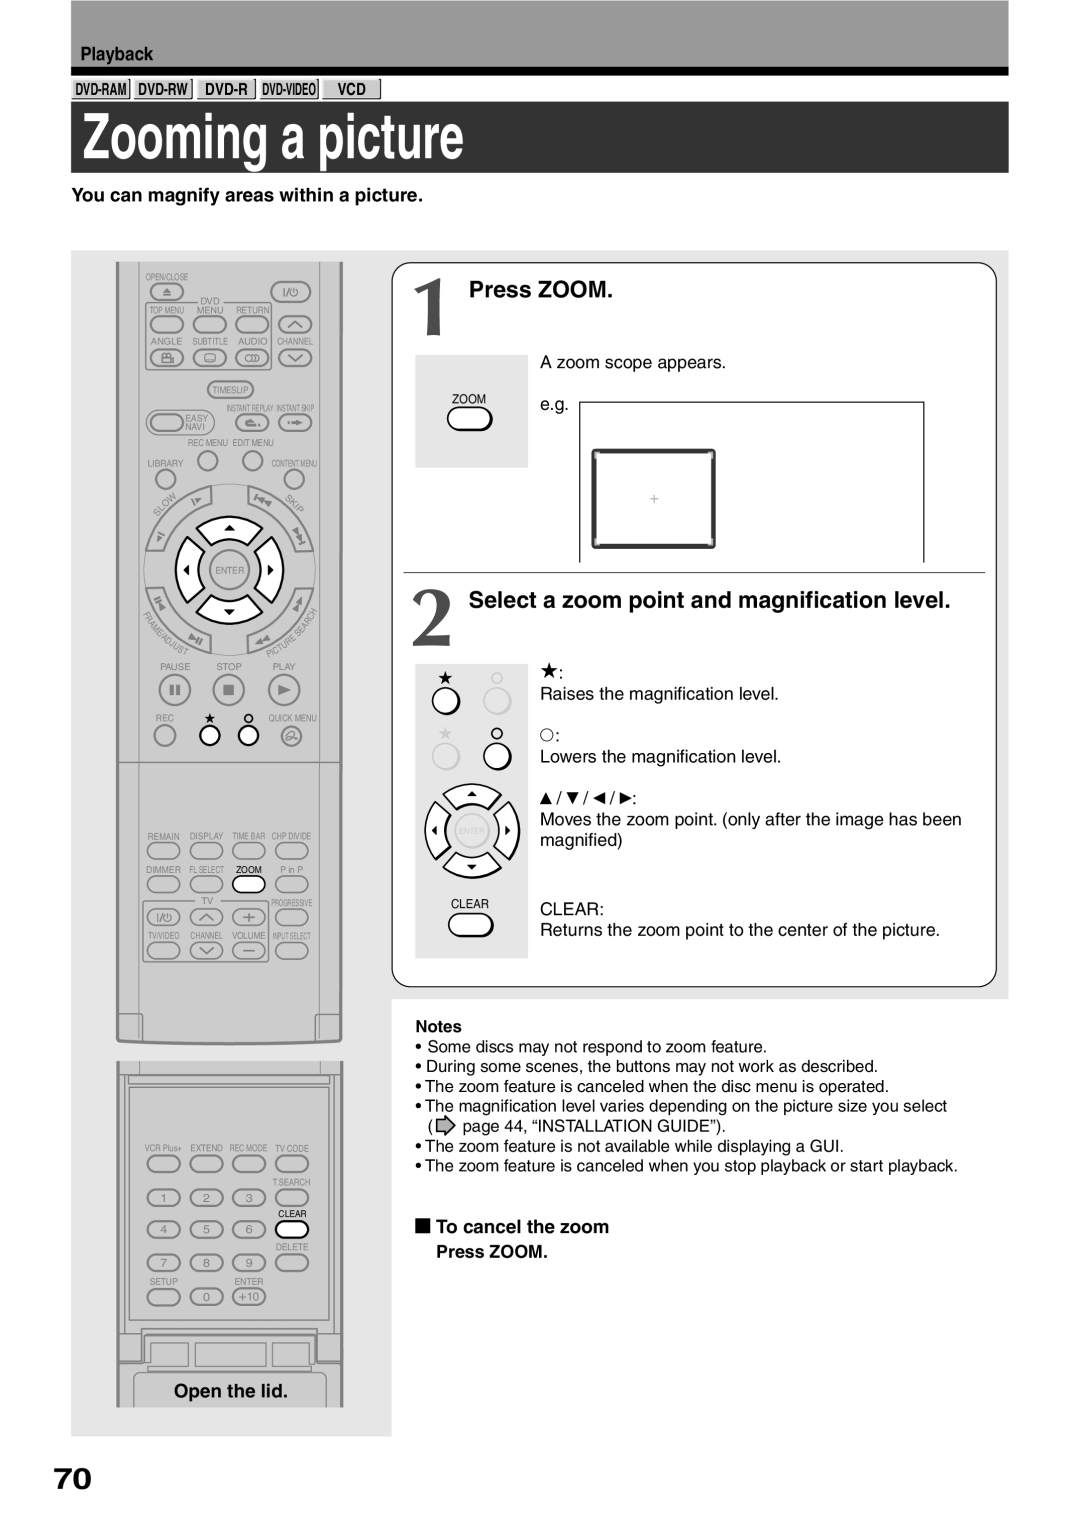 Toshiba D-R2SC Zooming a picture, Press ZOOM, Select a zoom point and magnification level, To cancel the zoom, Playback 